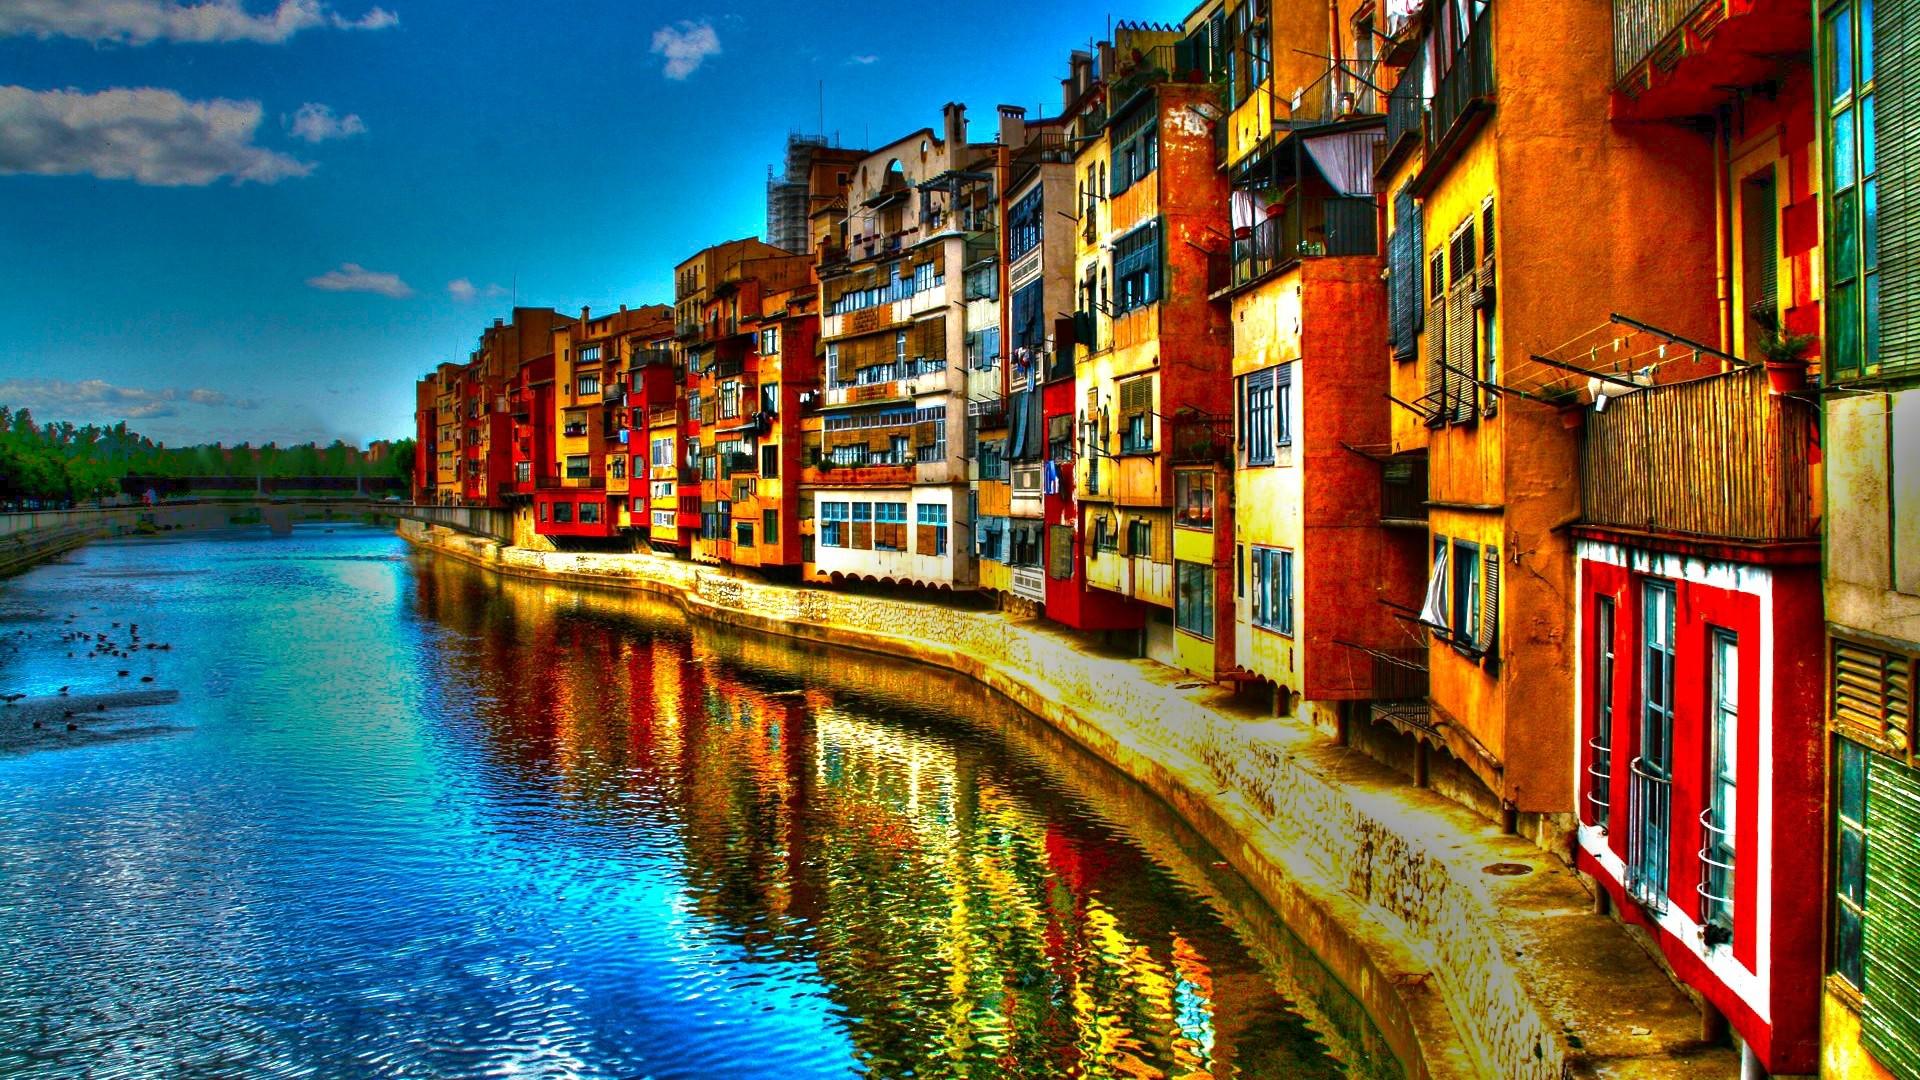 Houses at italian river - High Quality and Resolution